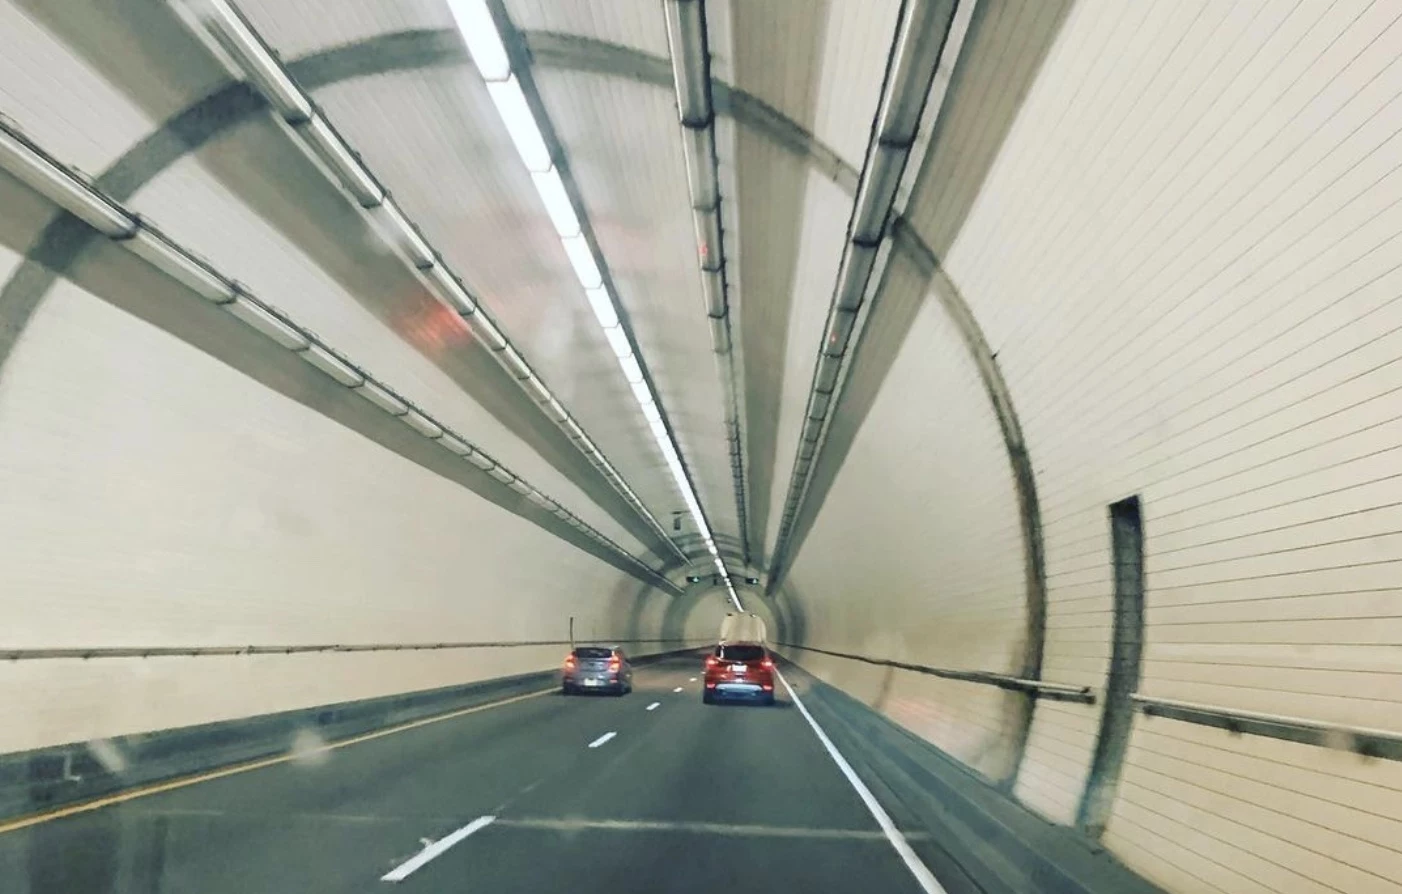 His tunnel fits are always on point. 🤩 • The Oklahoma City